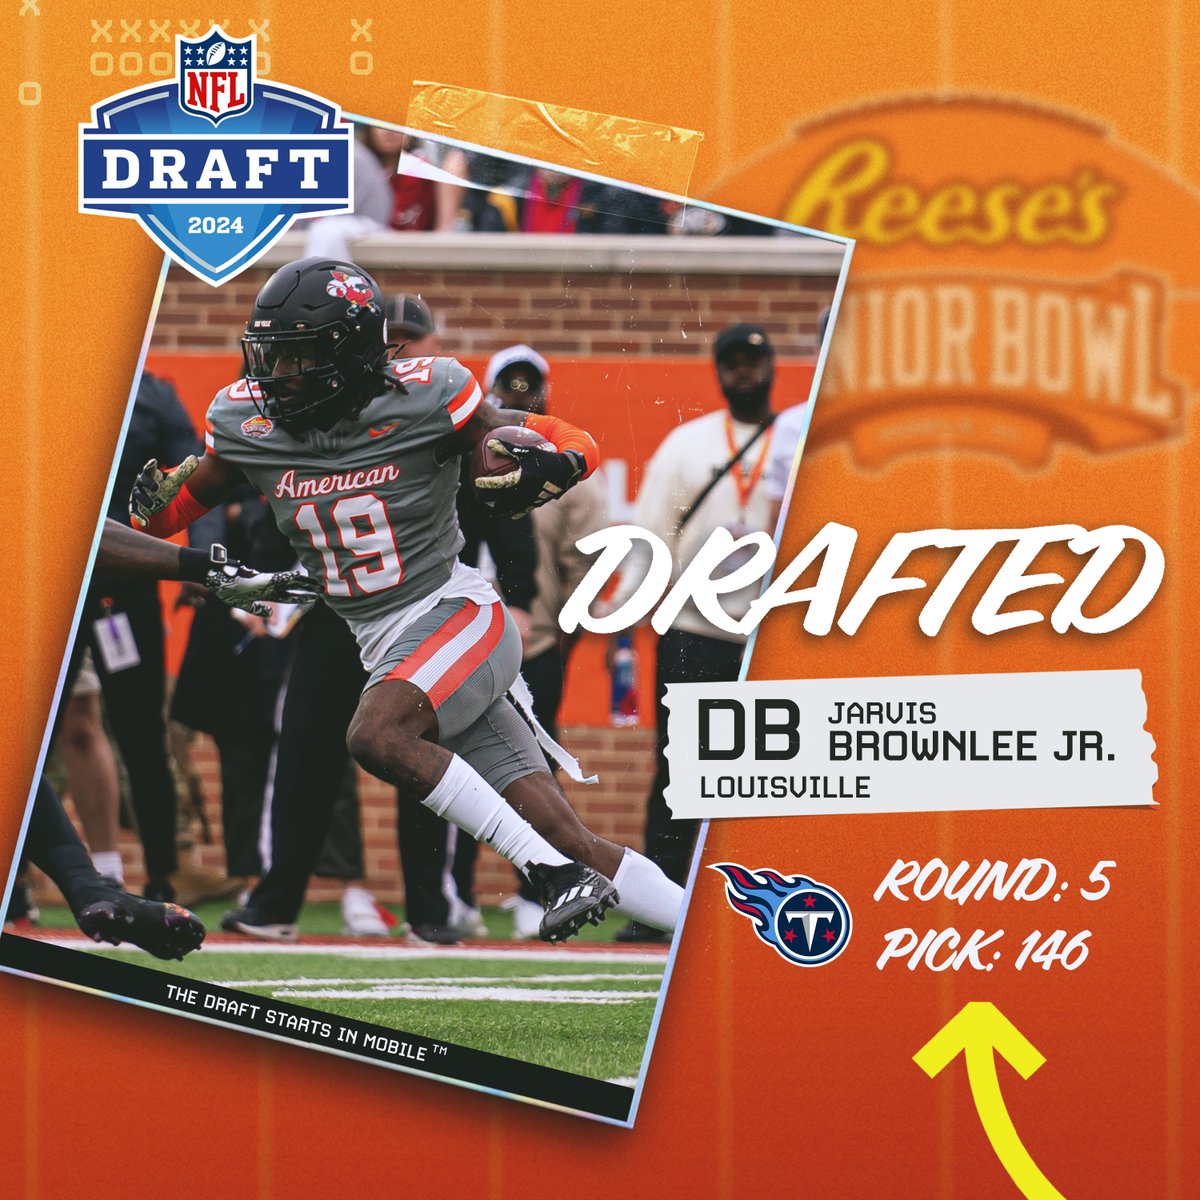 #NFLDraft The @Titans have selected Senior Bowl alum @JarvisBrownlee3 out of @LouisvilleFB. Congratulations! #TitanUp #TheDraftStartsInMOBILE™️